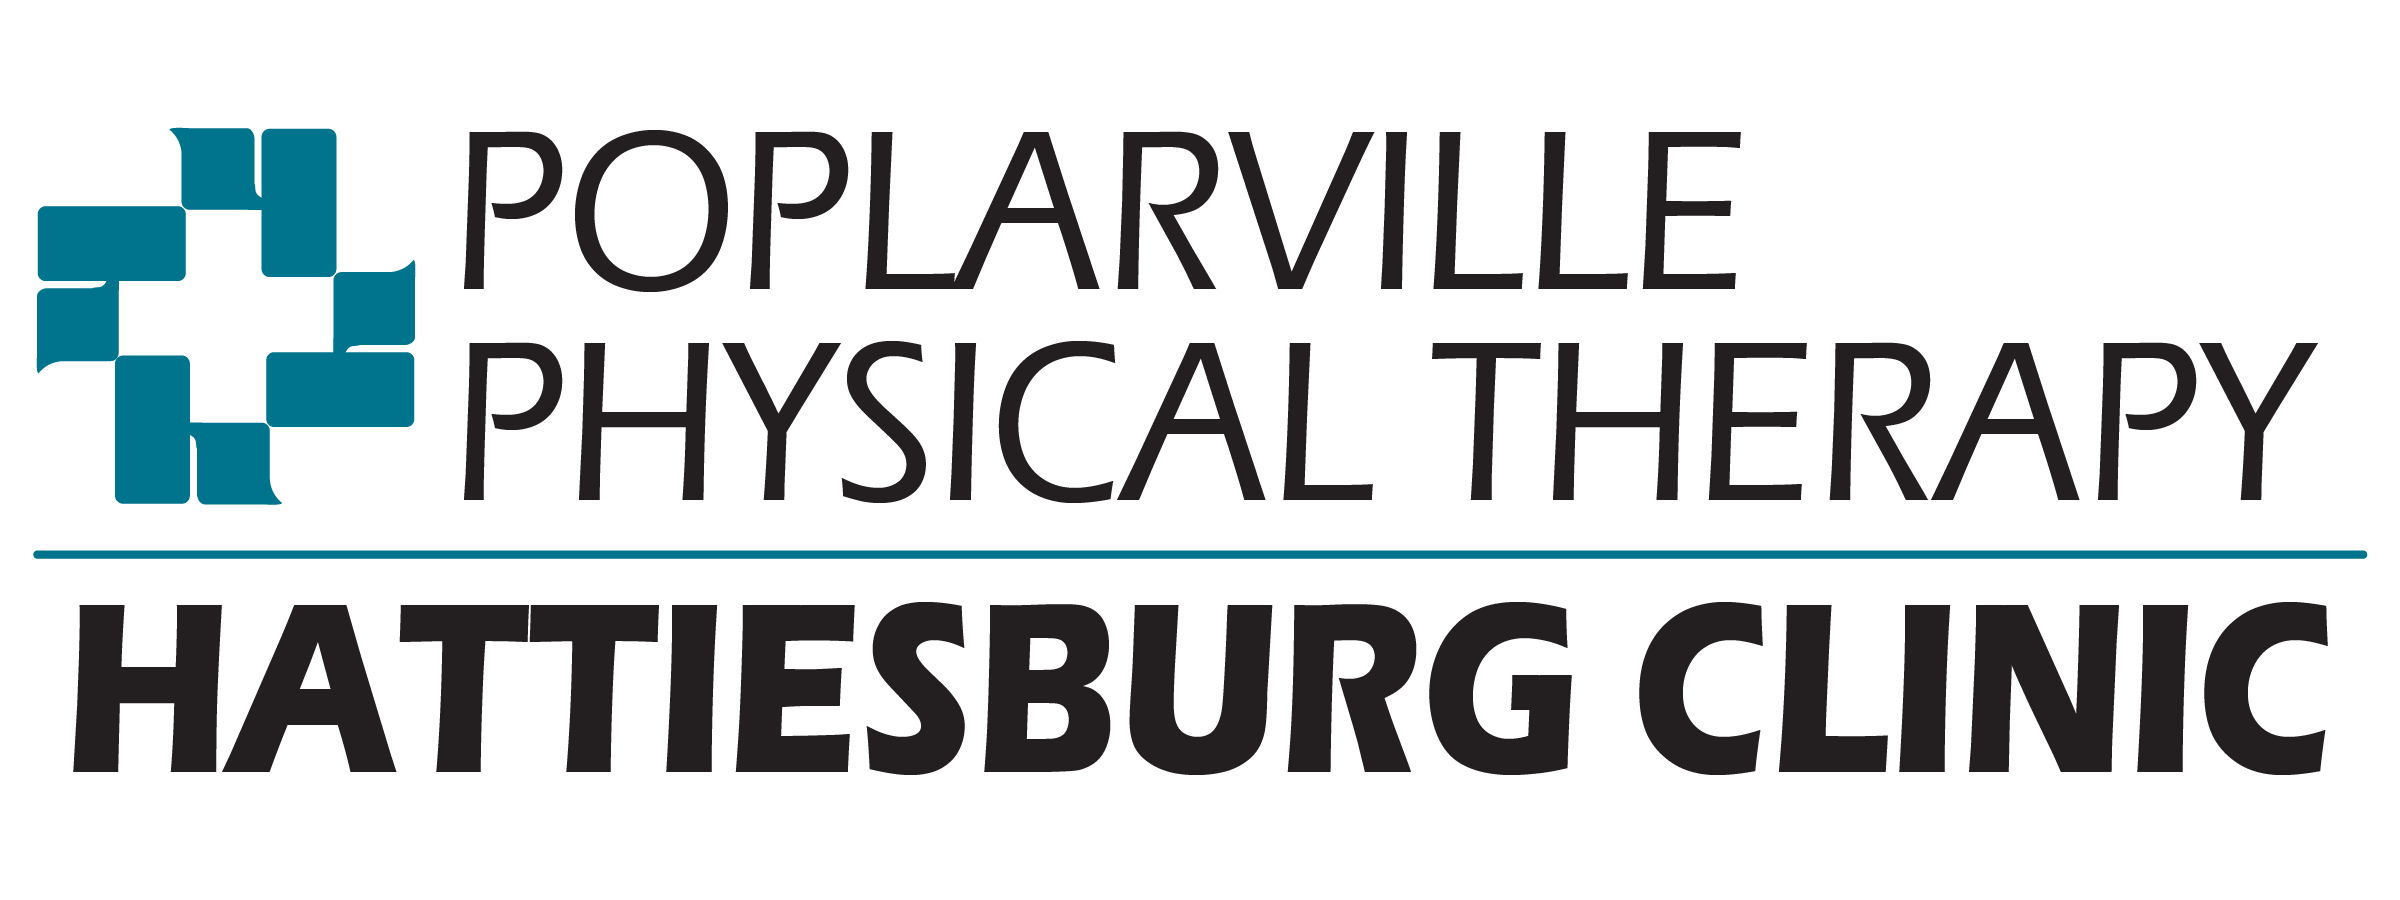 Poplarville Physical Therapy logo